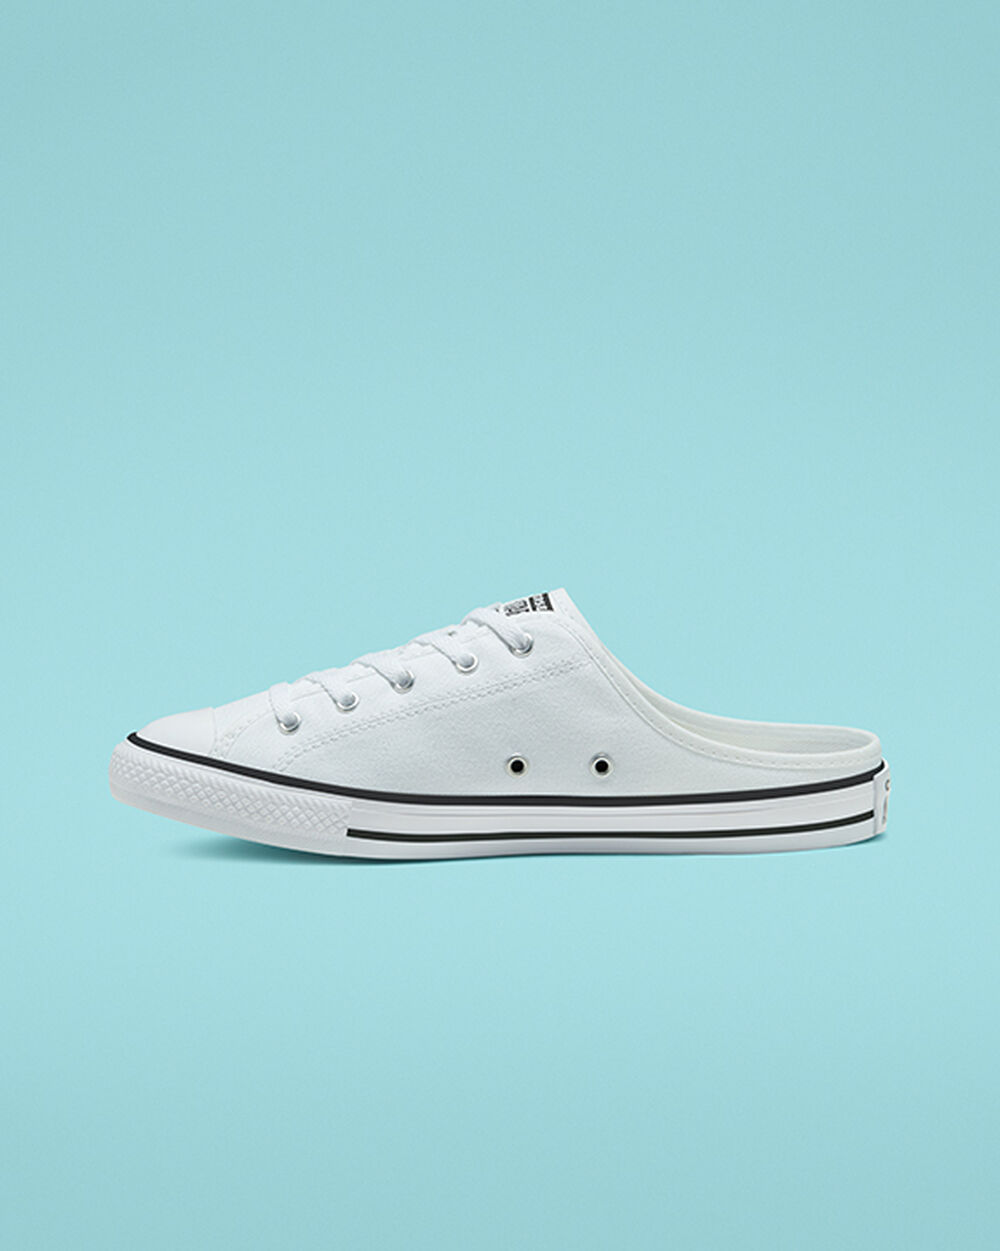 Slip On Converse Chuck Taylor All Star Mujer Blancos Negros | Mexico-806266